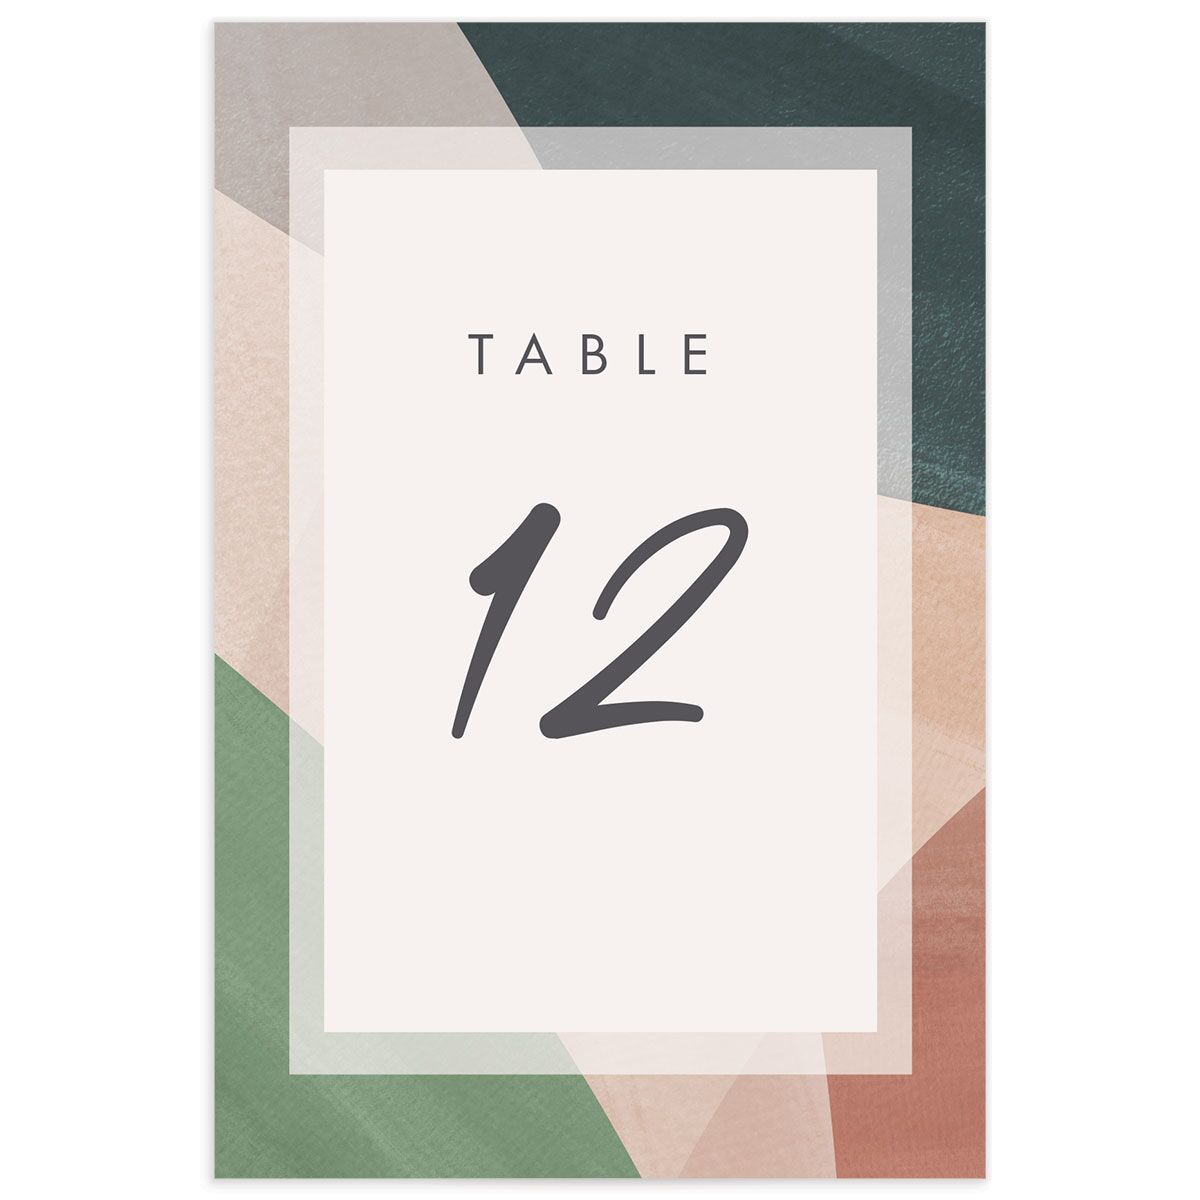 Abstract Geometric Table Numbers back in Jewel Green